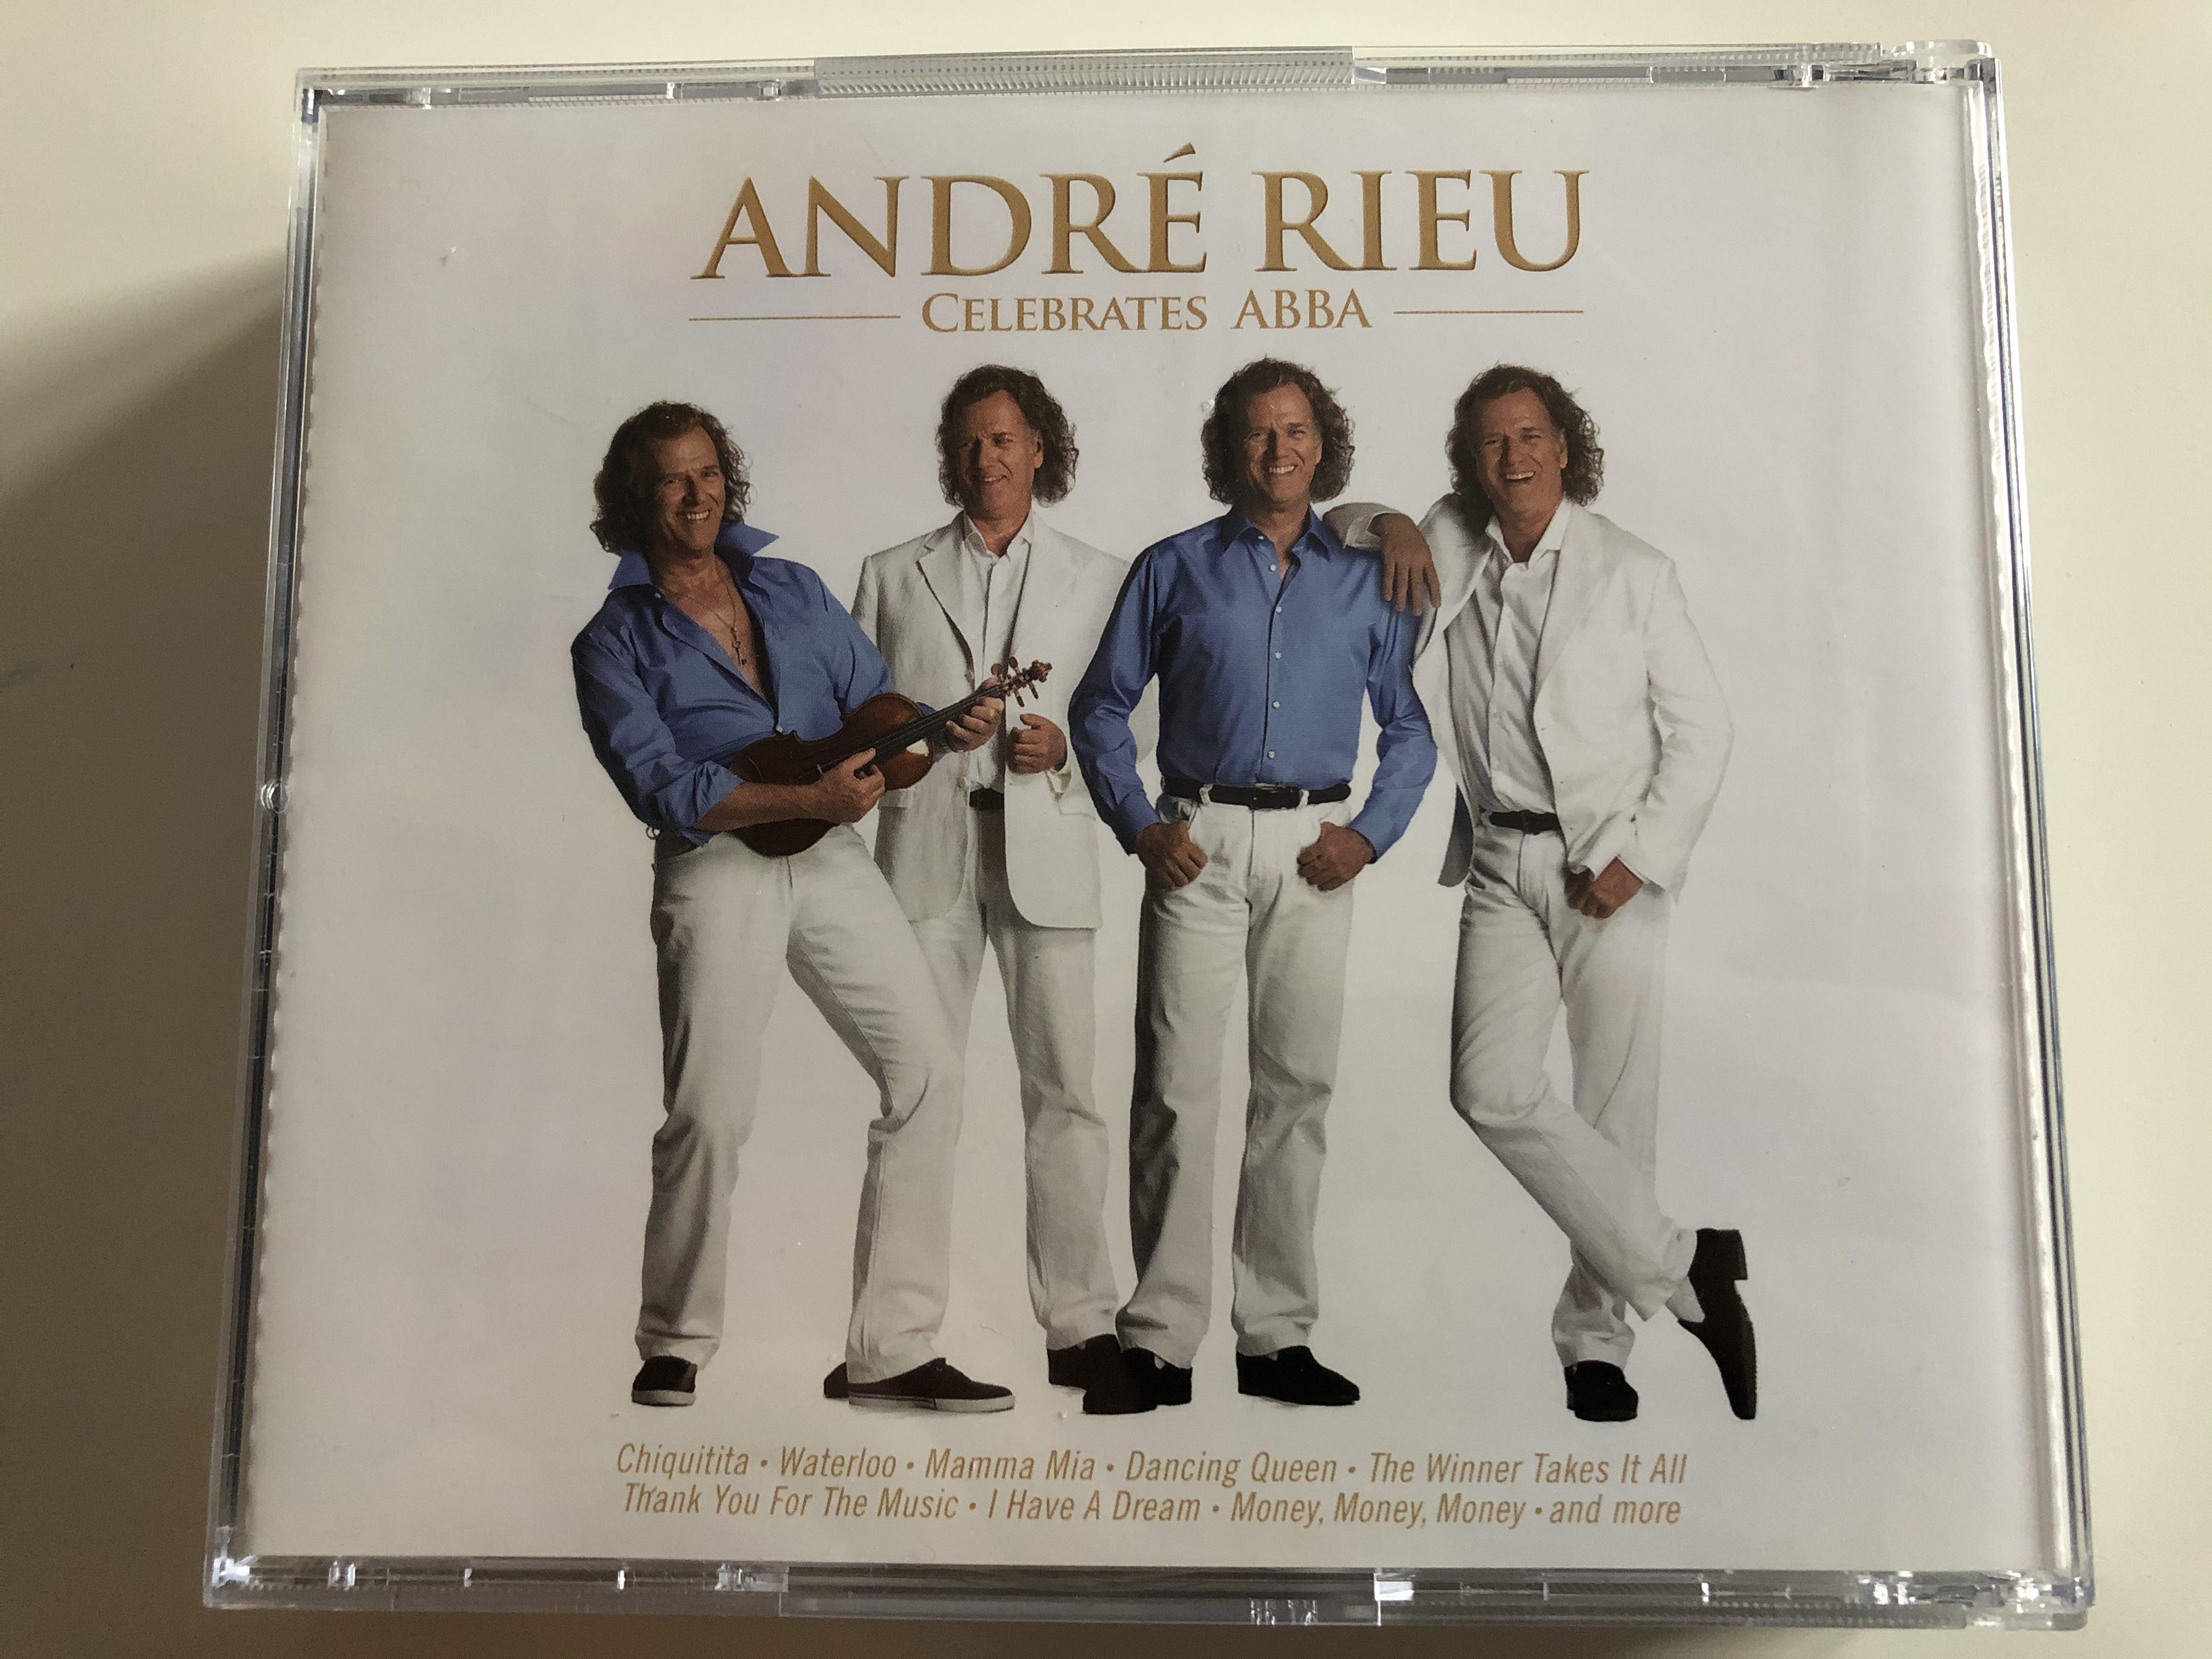 andr-rieu-celebrates-abba-music-of-the-night-chiquitita-waterloo-mamma-mia-dancing-queen-i-don-t-know-how-to-love-him-yesterday-on-my-own-ben-andre-rieu-productions-2x-audio-cd-2013-1-.jpg